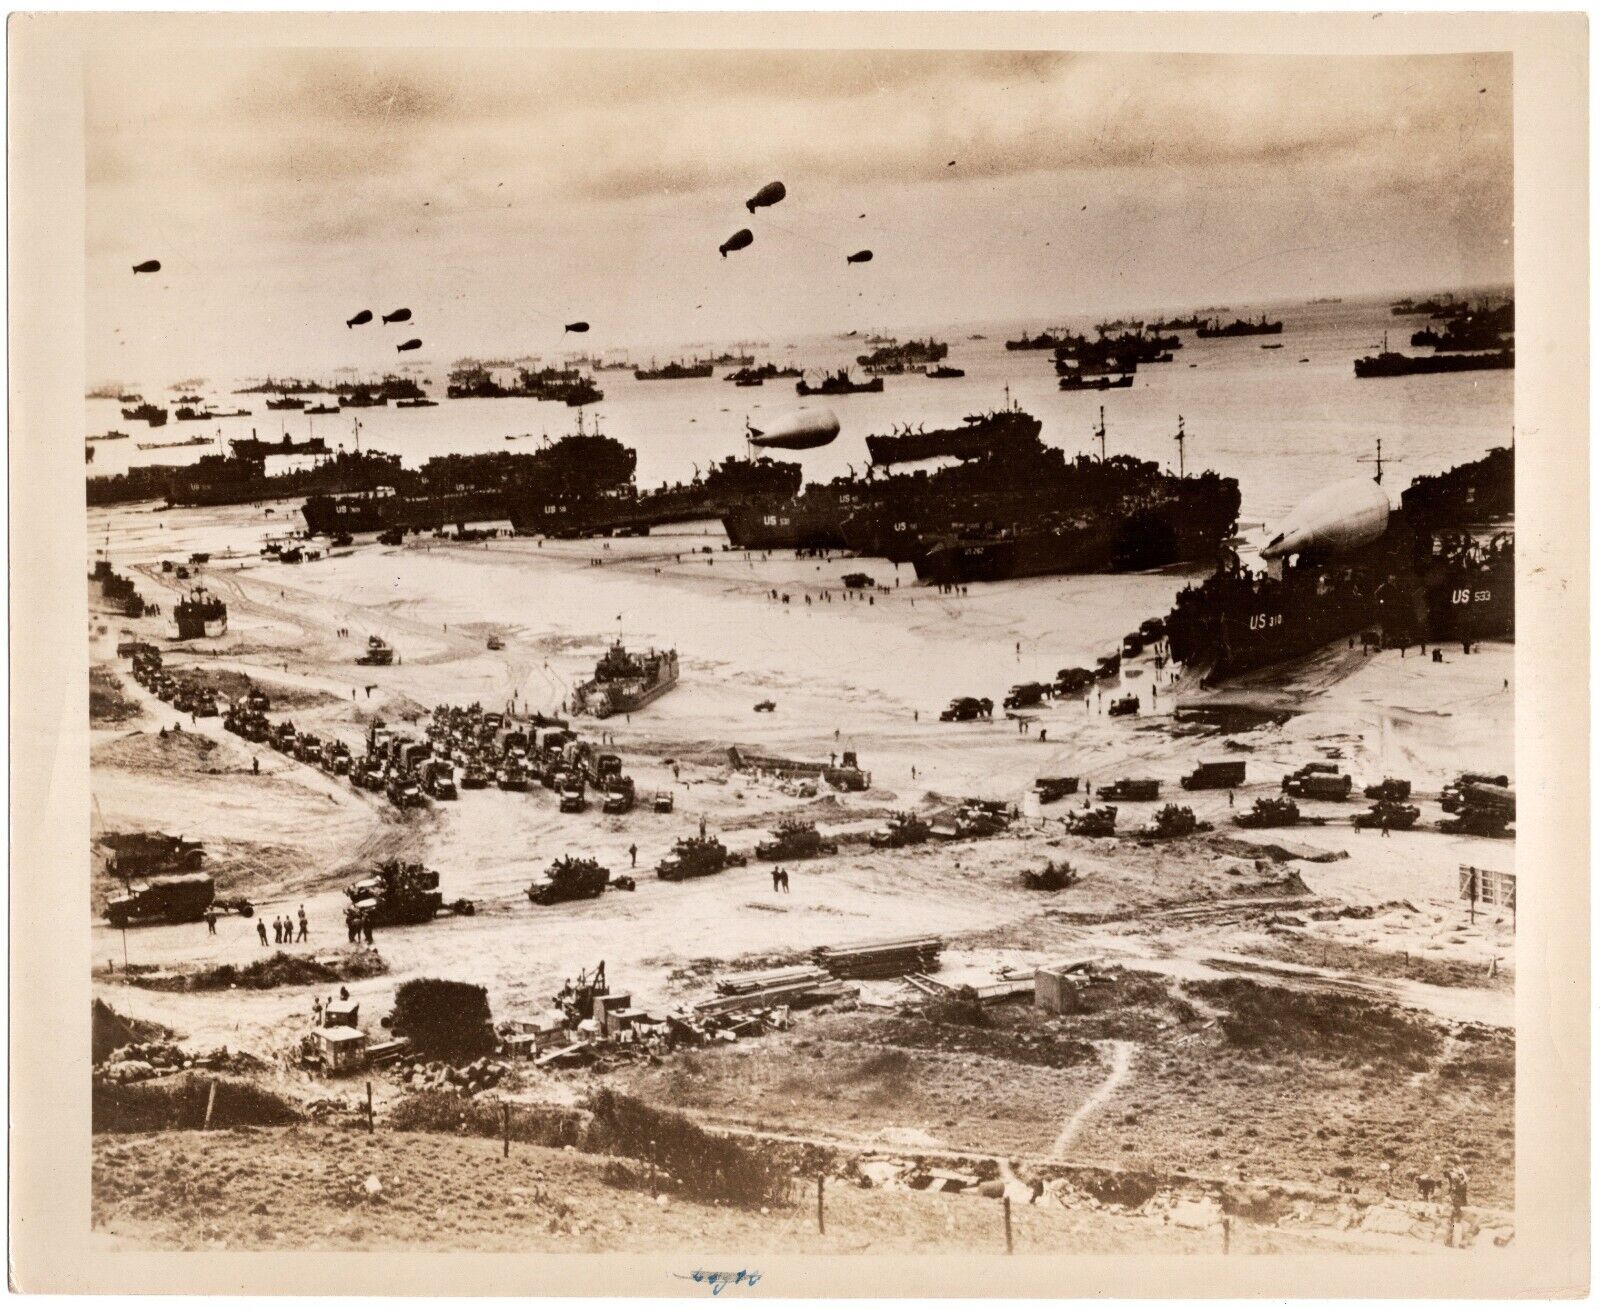 U.S. Navy photograph showing Allied landings in Normandy on D-Day, June 6, 1944